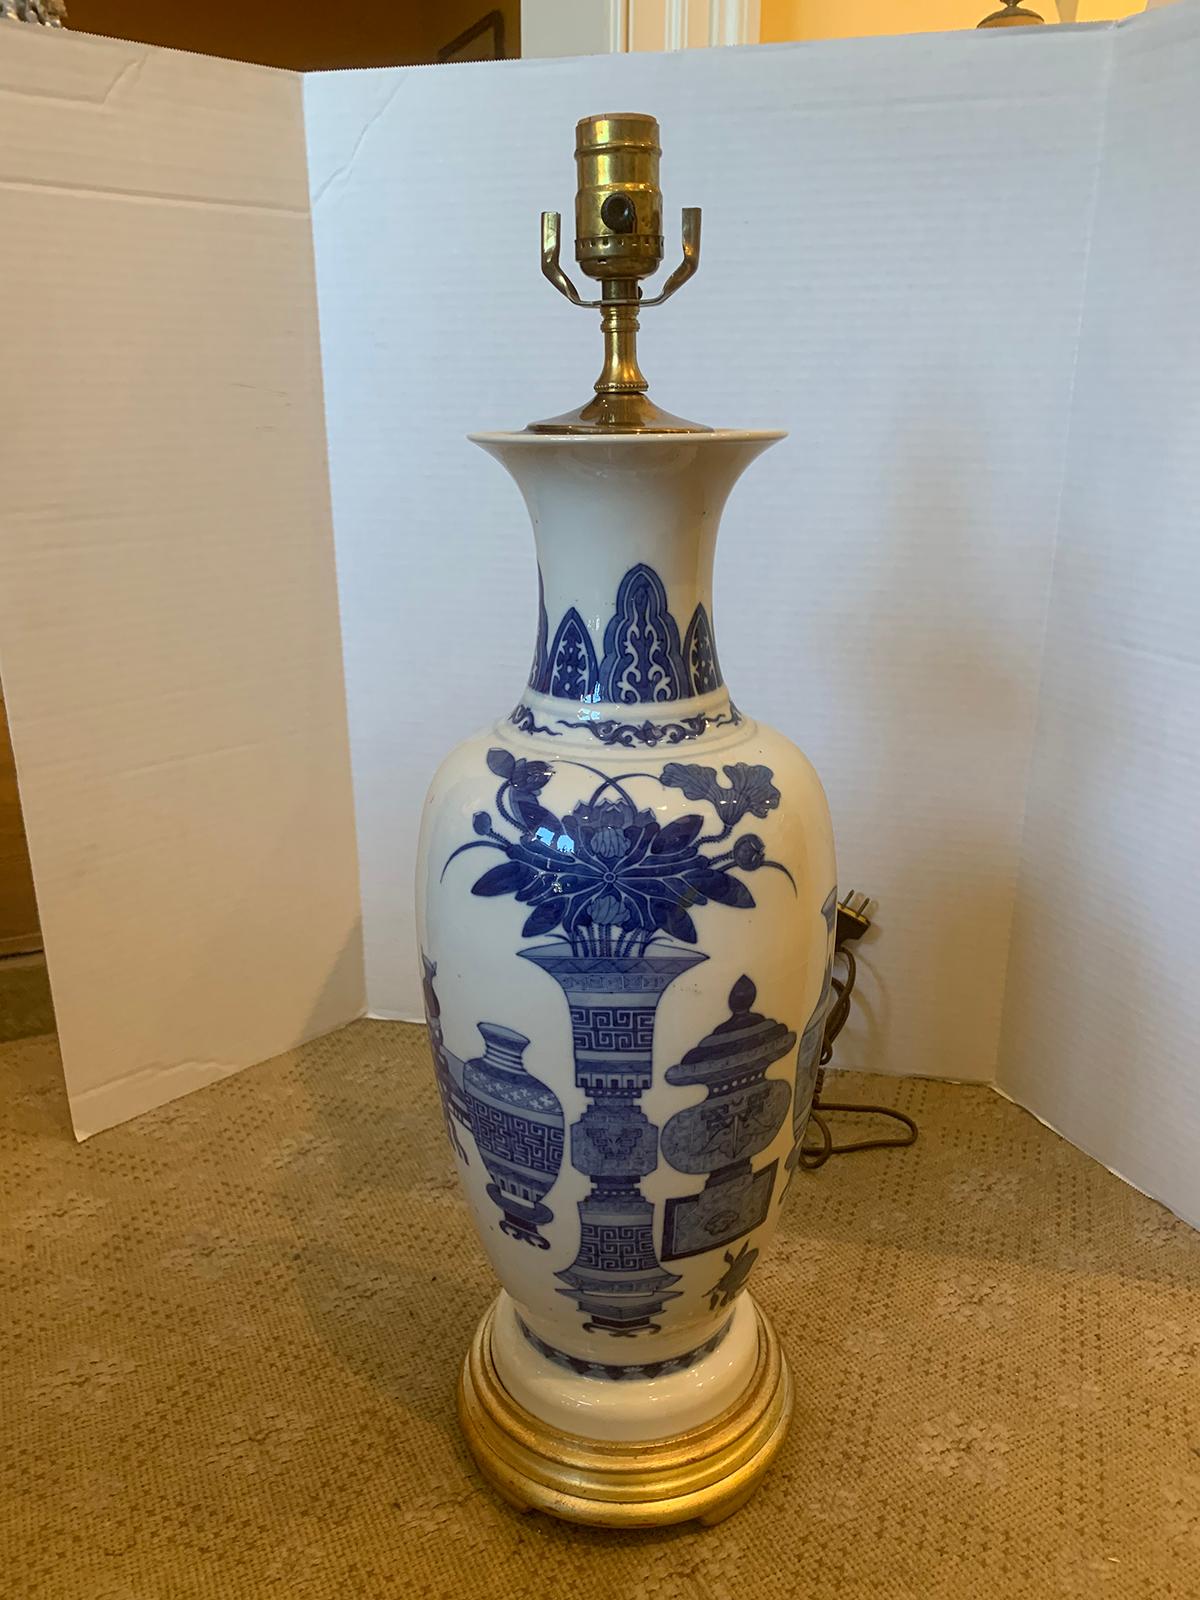 19th-20th century blue and white porcelain lamp from Estate of D. Byers. Possibly old W.E. Brown Co.
New wiring.